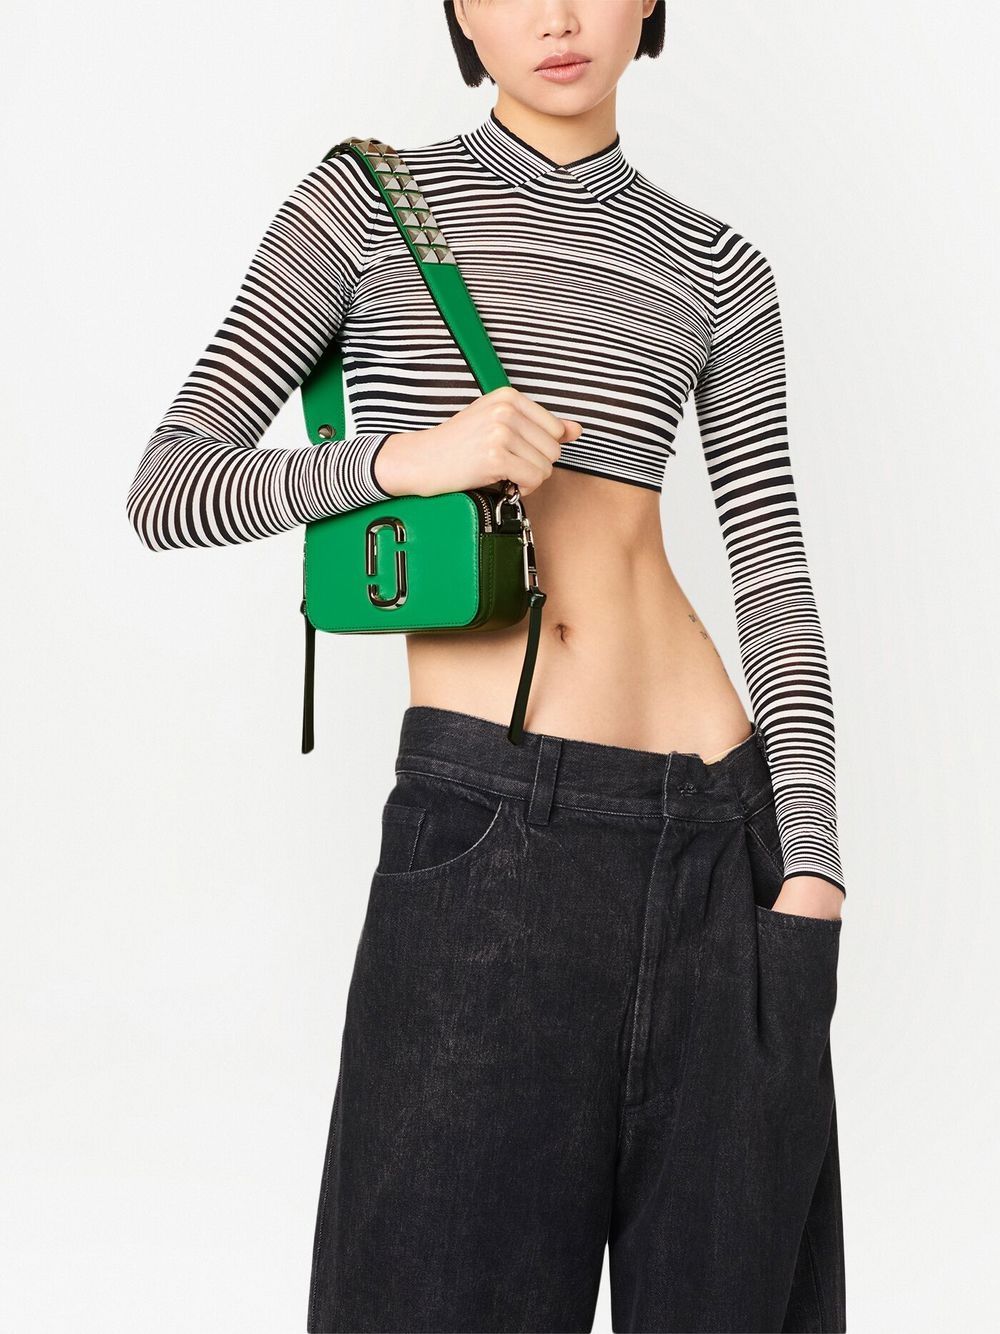 Marc Jacobs Snapshot Leather Camera Bag In Mint Julep